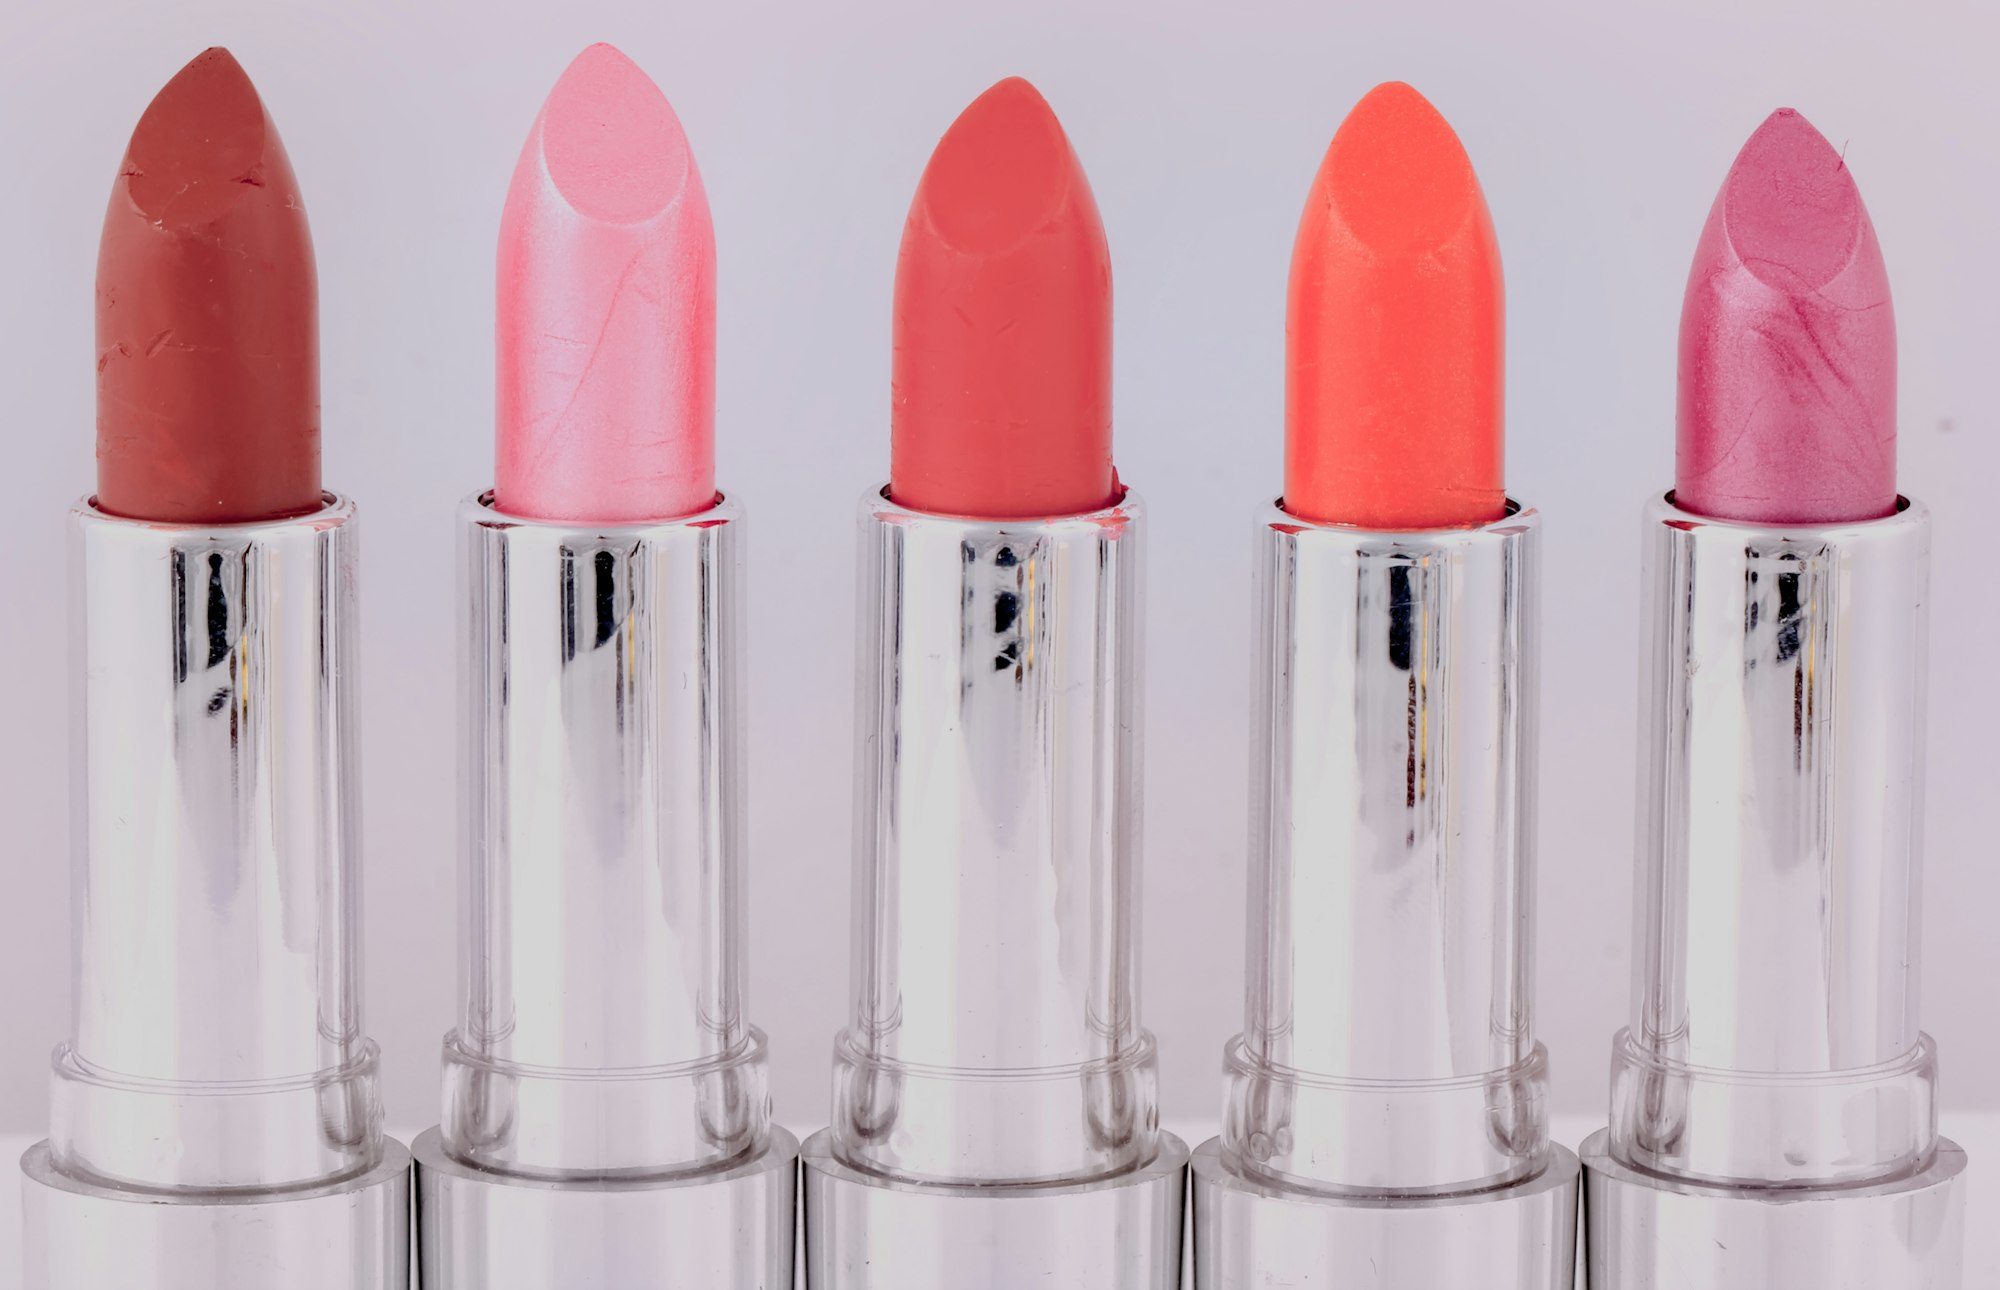 lipsticks, white, silver, background, plastic, red, pink, violet, brown, orange, together, row, abreast, parallel, side by side, side, cosmetics, beauty